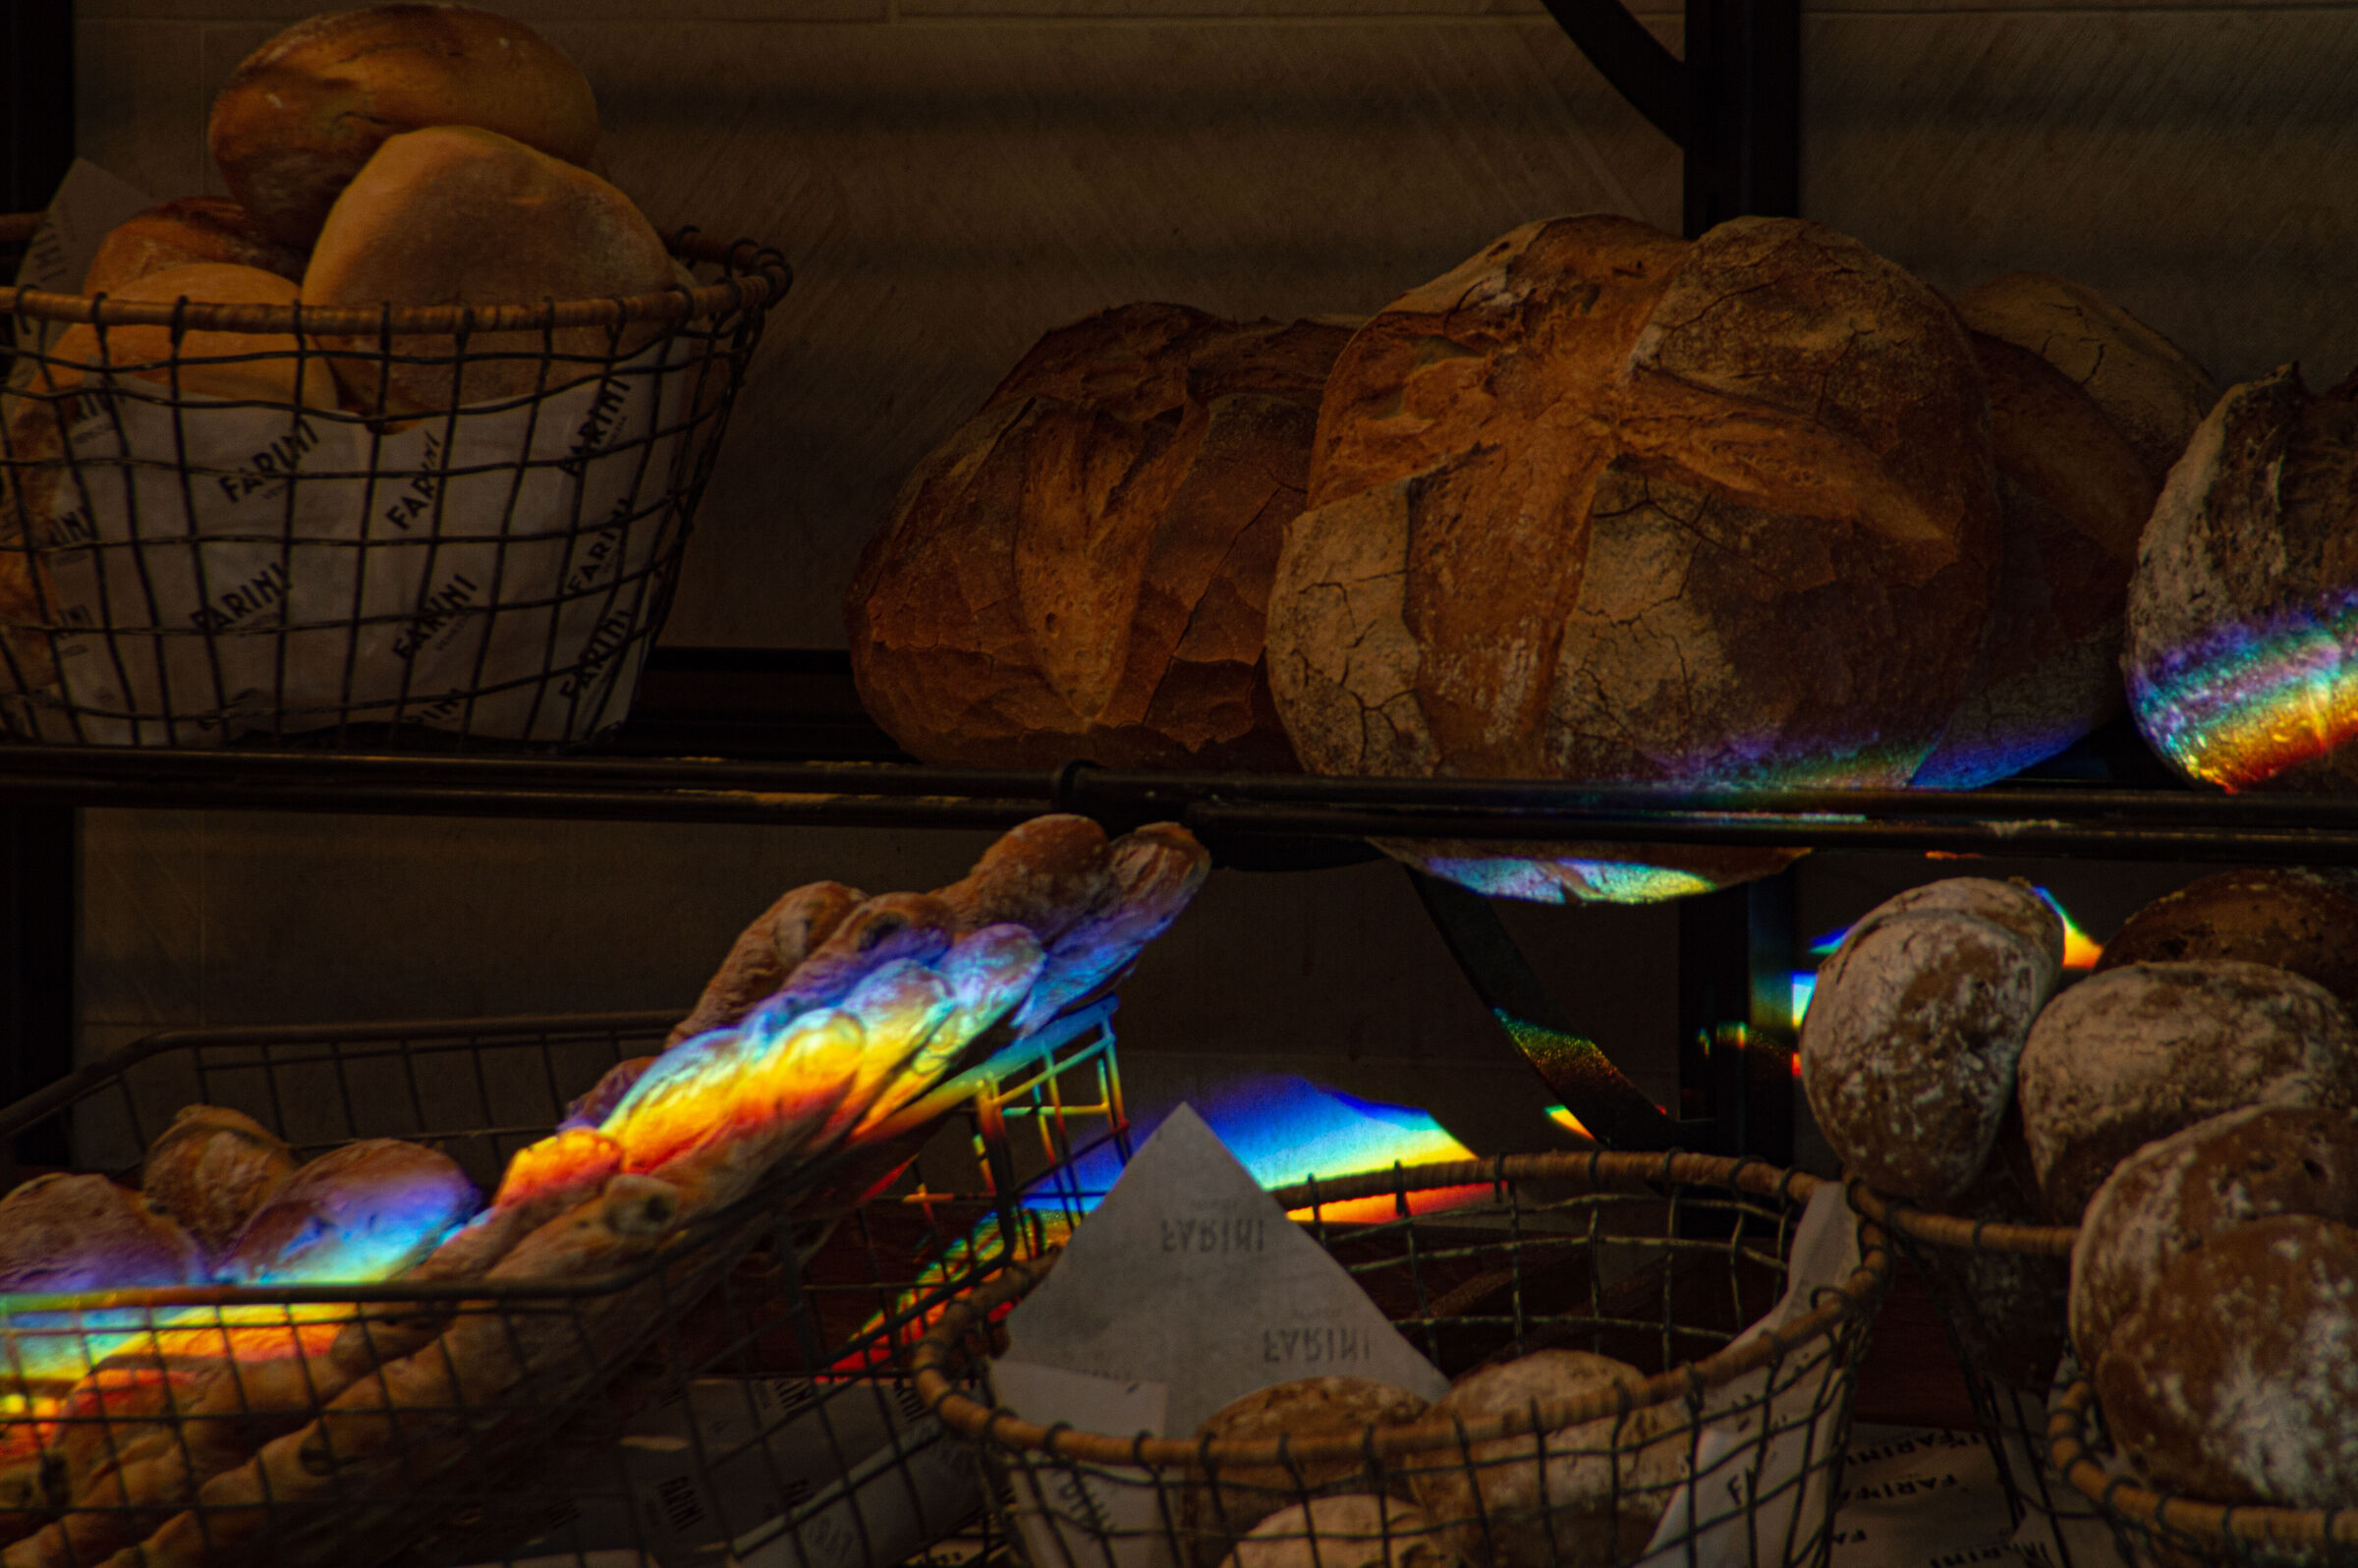 The colors of bread...